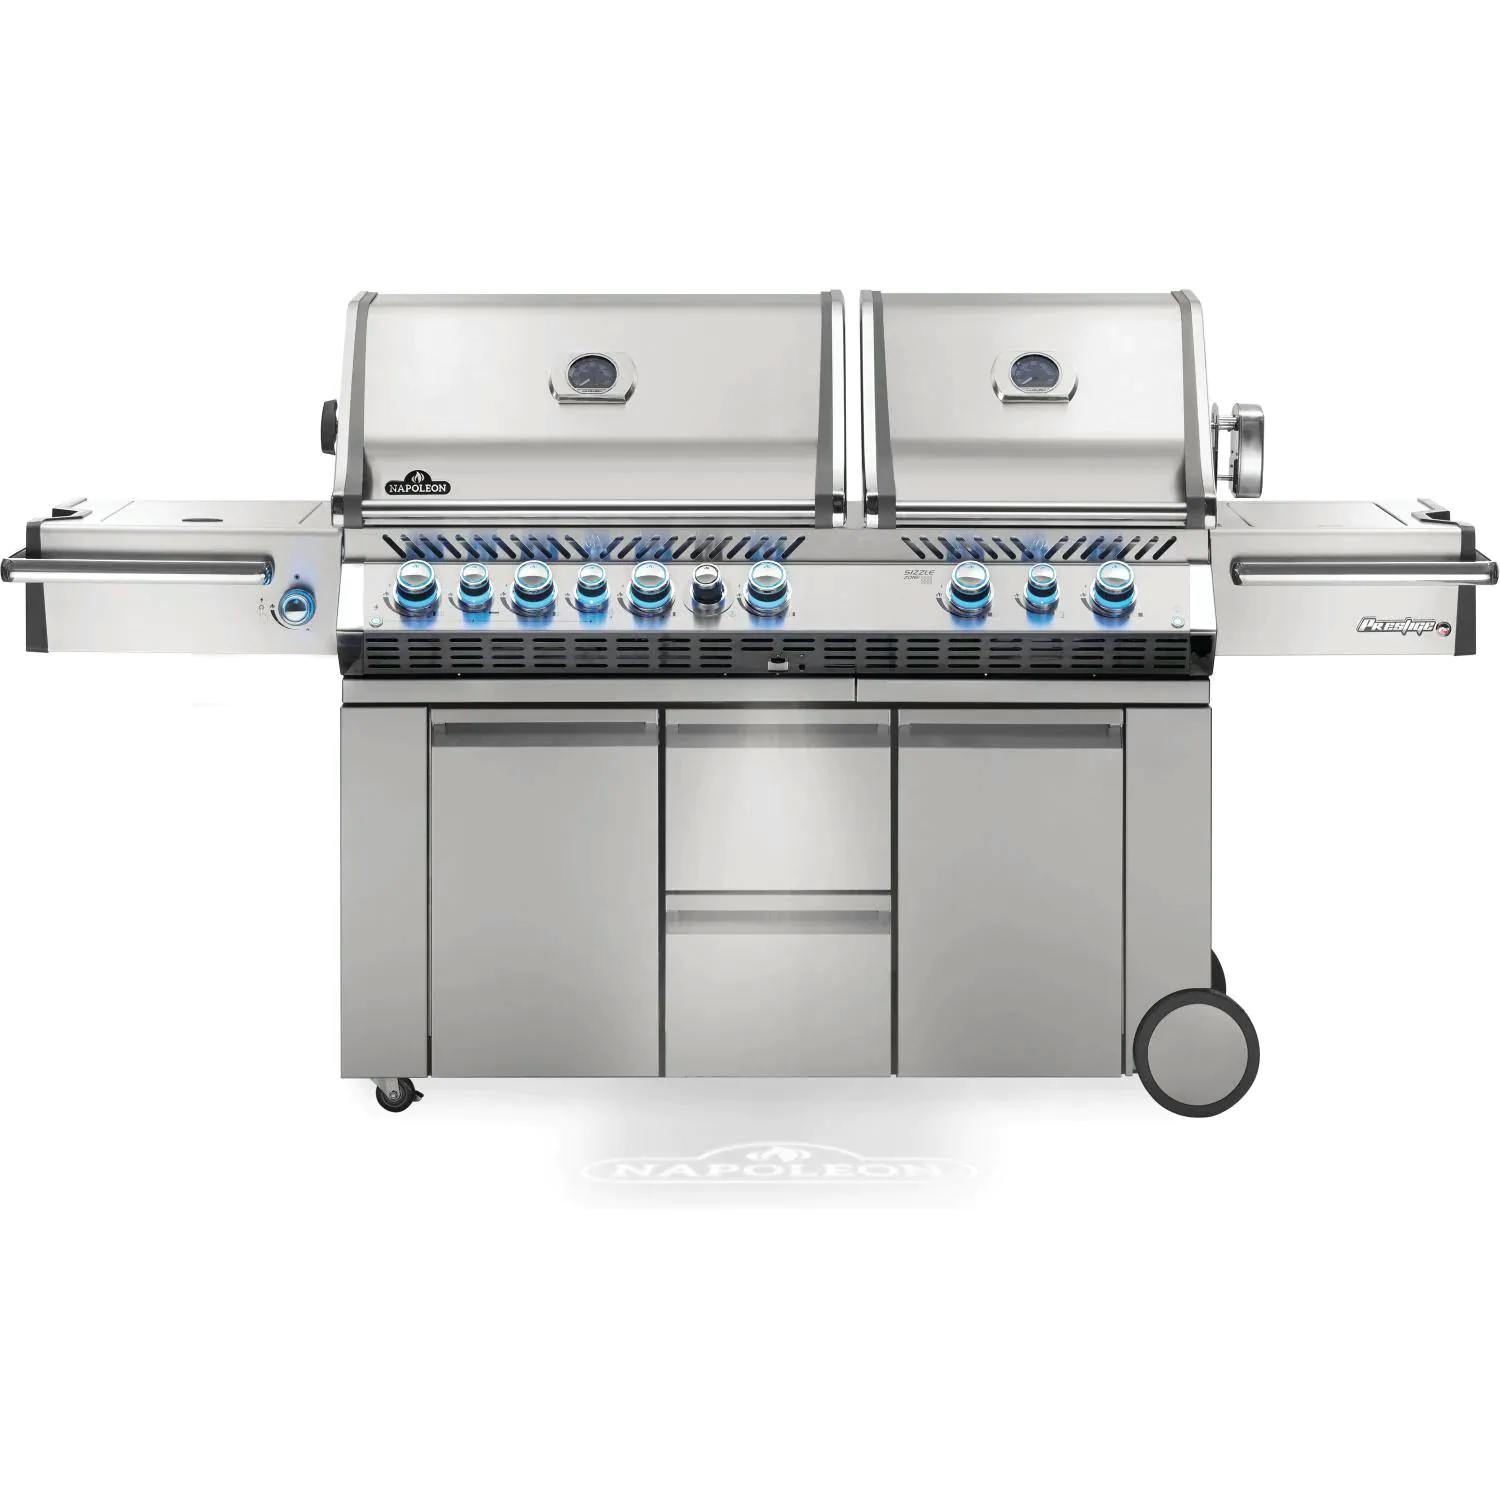 Napoleon Prestige PRO 825 Gas Grill with Infrared Rear Burner, Double Infrared Sear Burner and Side Burner and Rotisserie Kit · Natural Gas